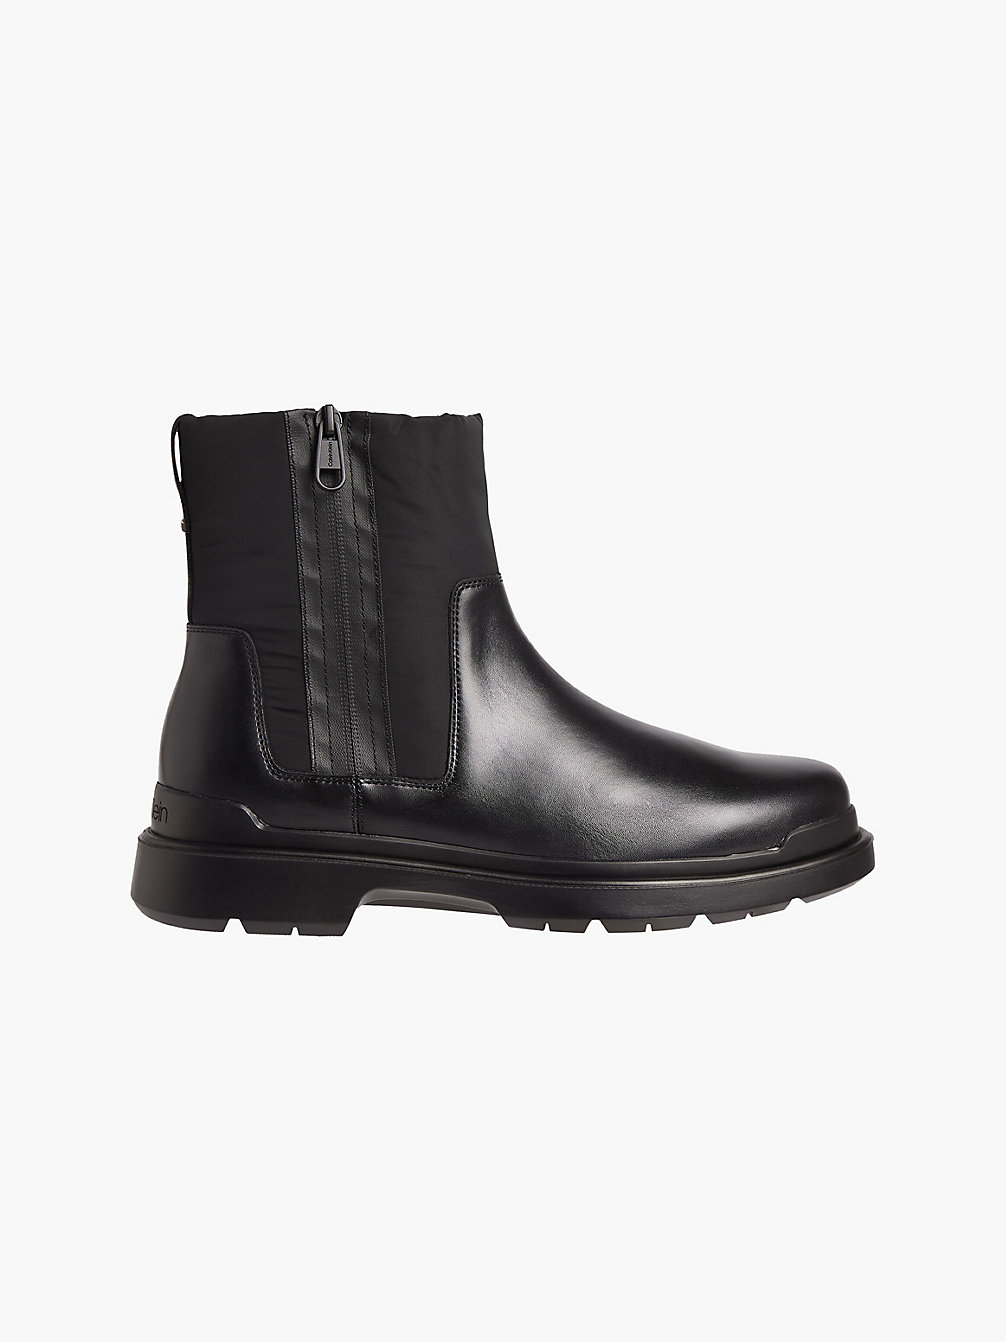 PVH BLACK Leather And Recycled Nylon Boots undefined men Calvin Klein